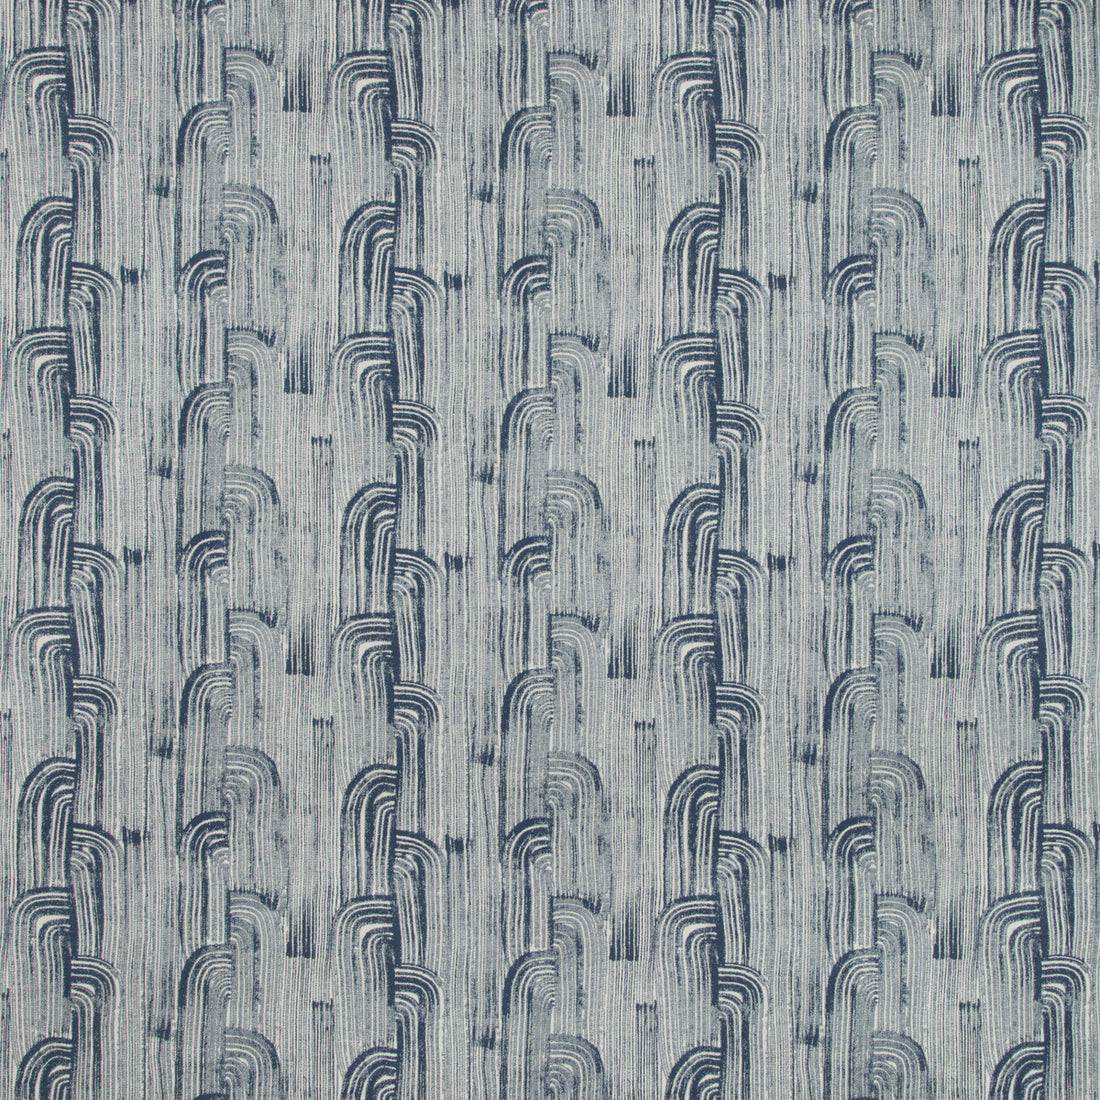 Crescent Weave fabric in marlin color - pattern GWF-3737.15.0 - by Lee Jofa Modern in the Kw Terra Firma II Indoor Outdoor collection